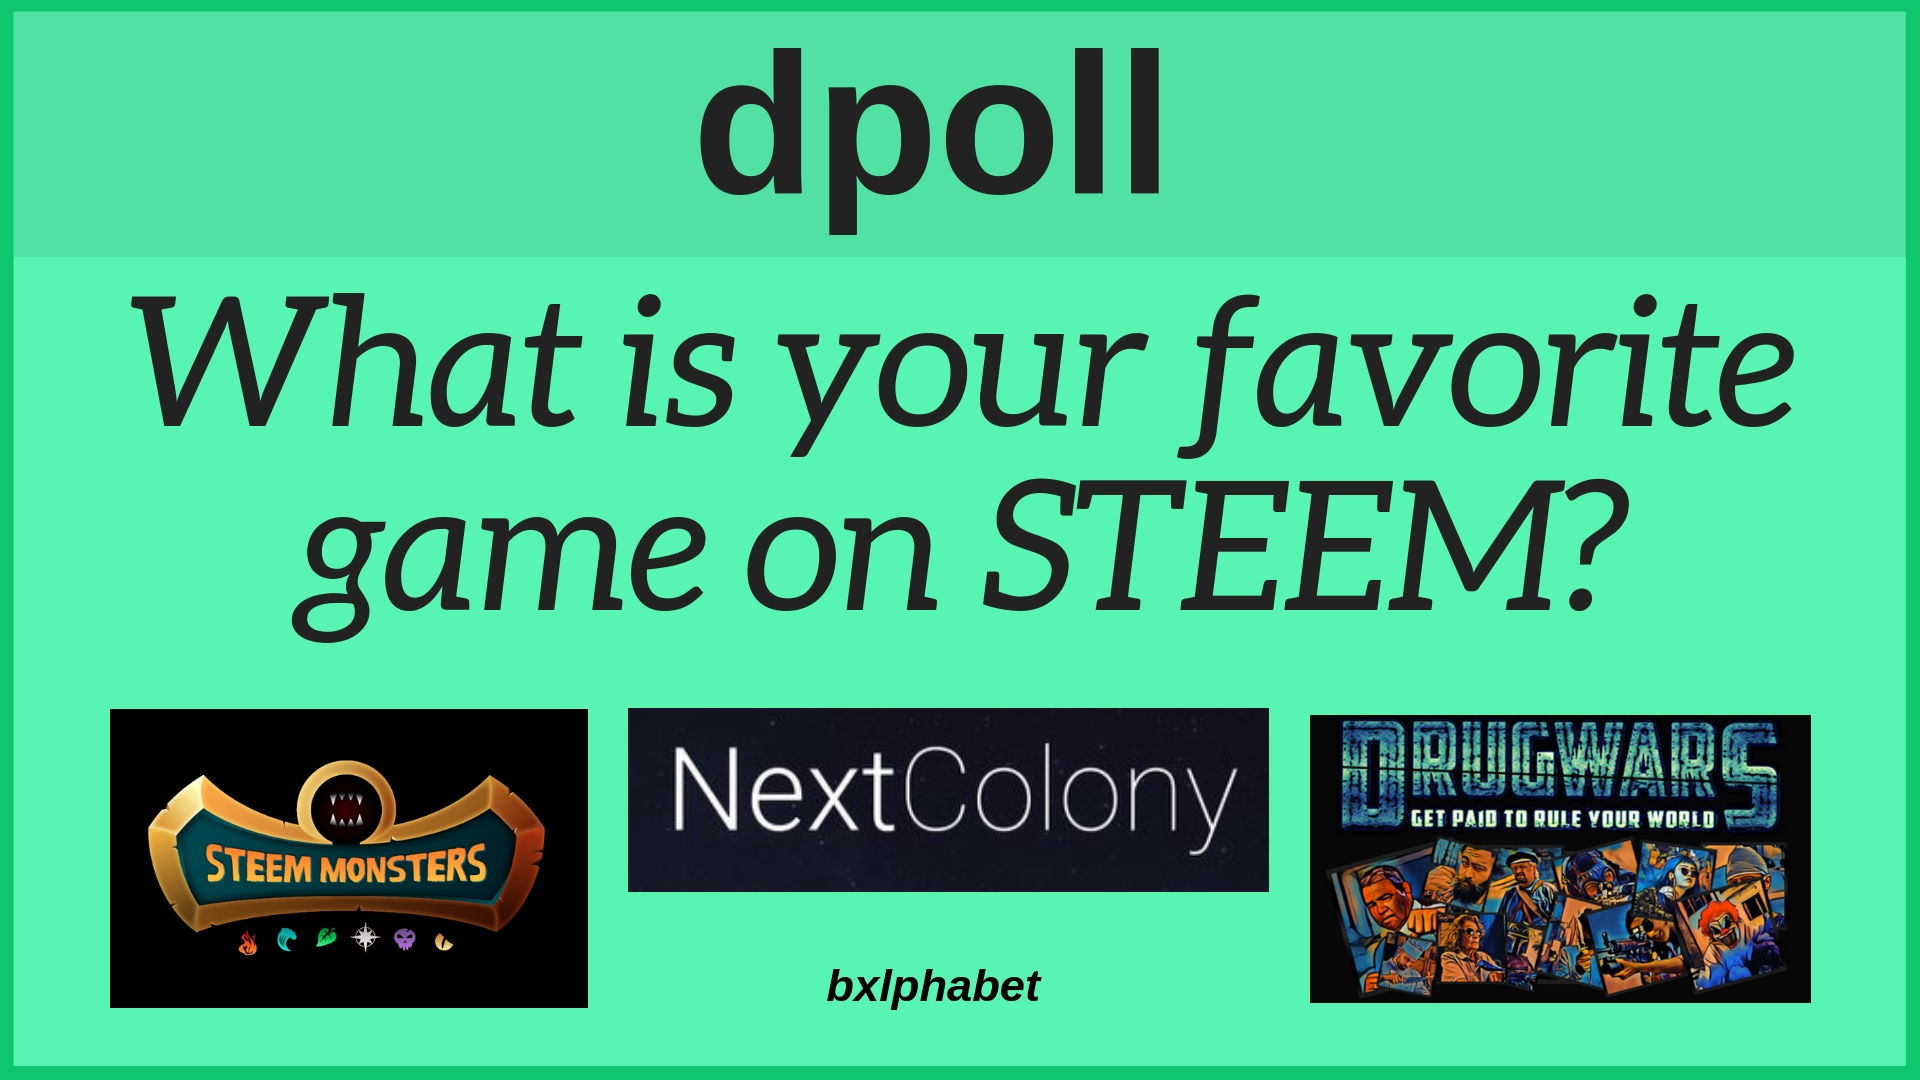 dpoll What is your favorite game on STEEM bxlphabet.jpg